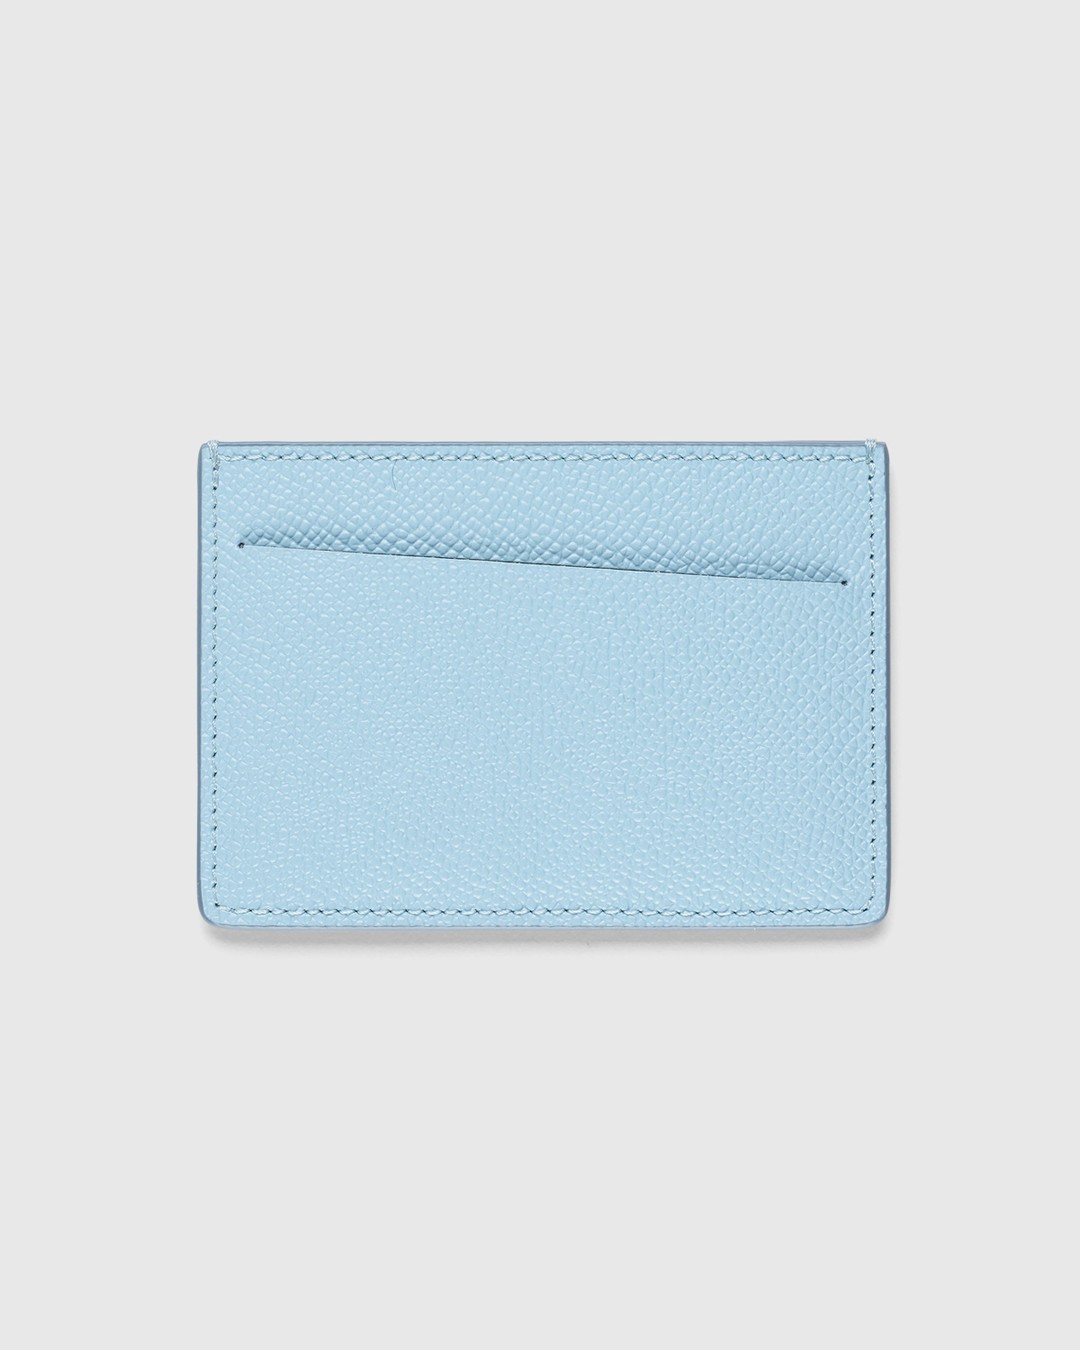 Maison Margiela – Leather Card Holder Thyme - Wallets - Green - Image 2